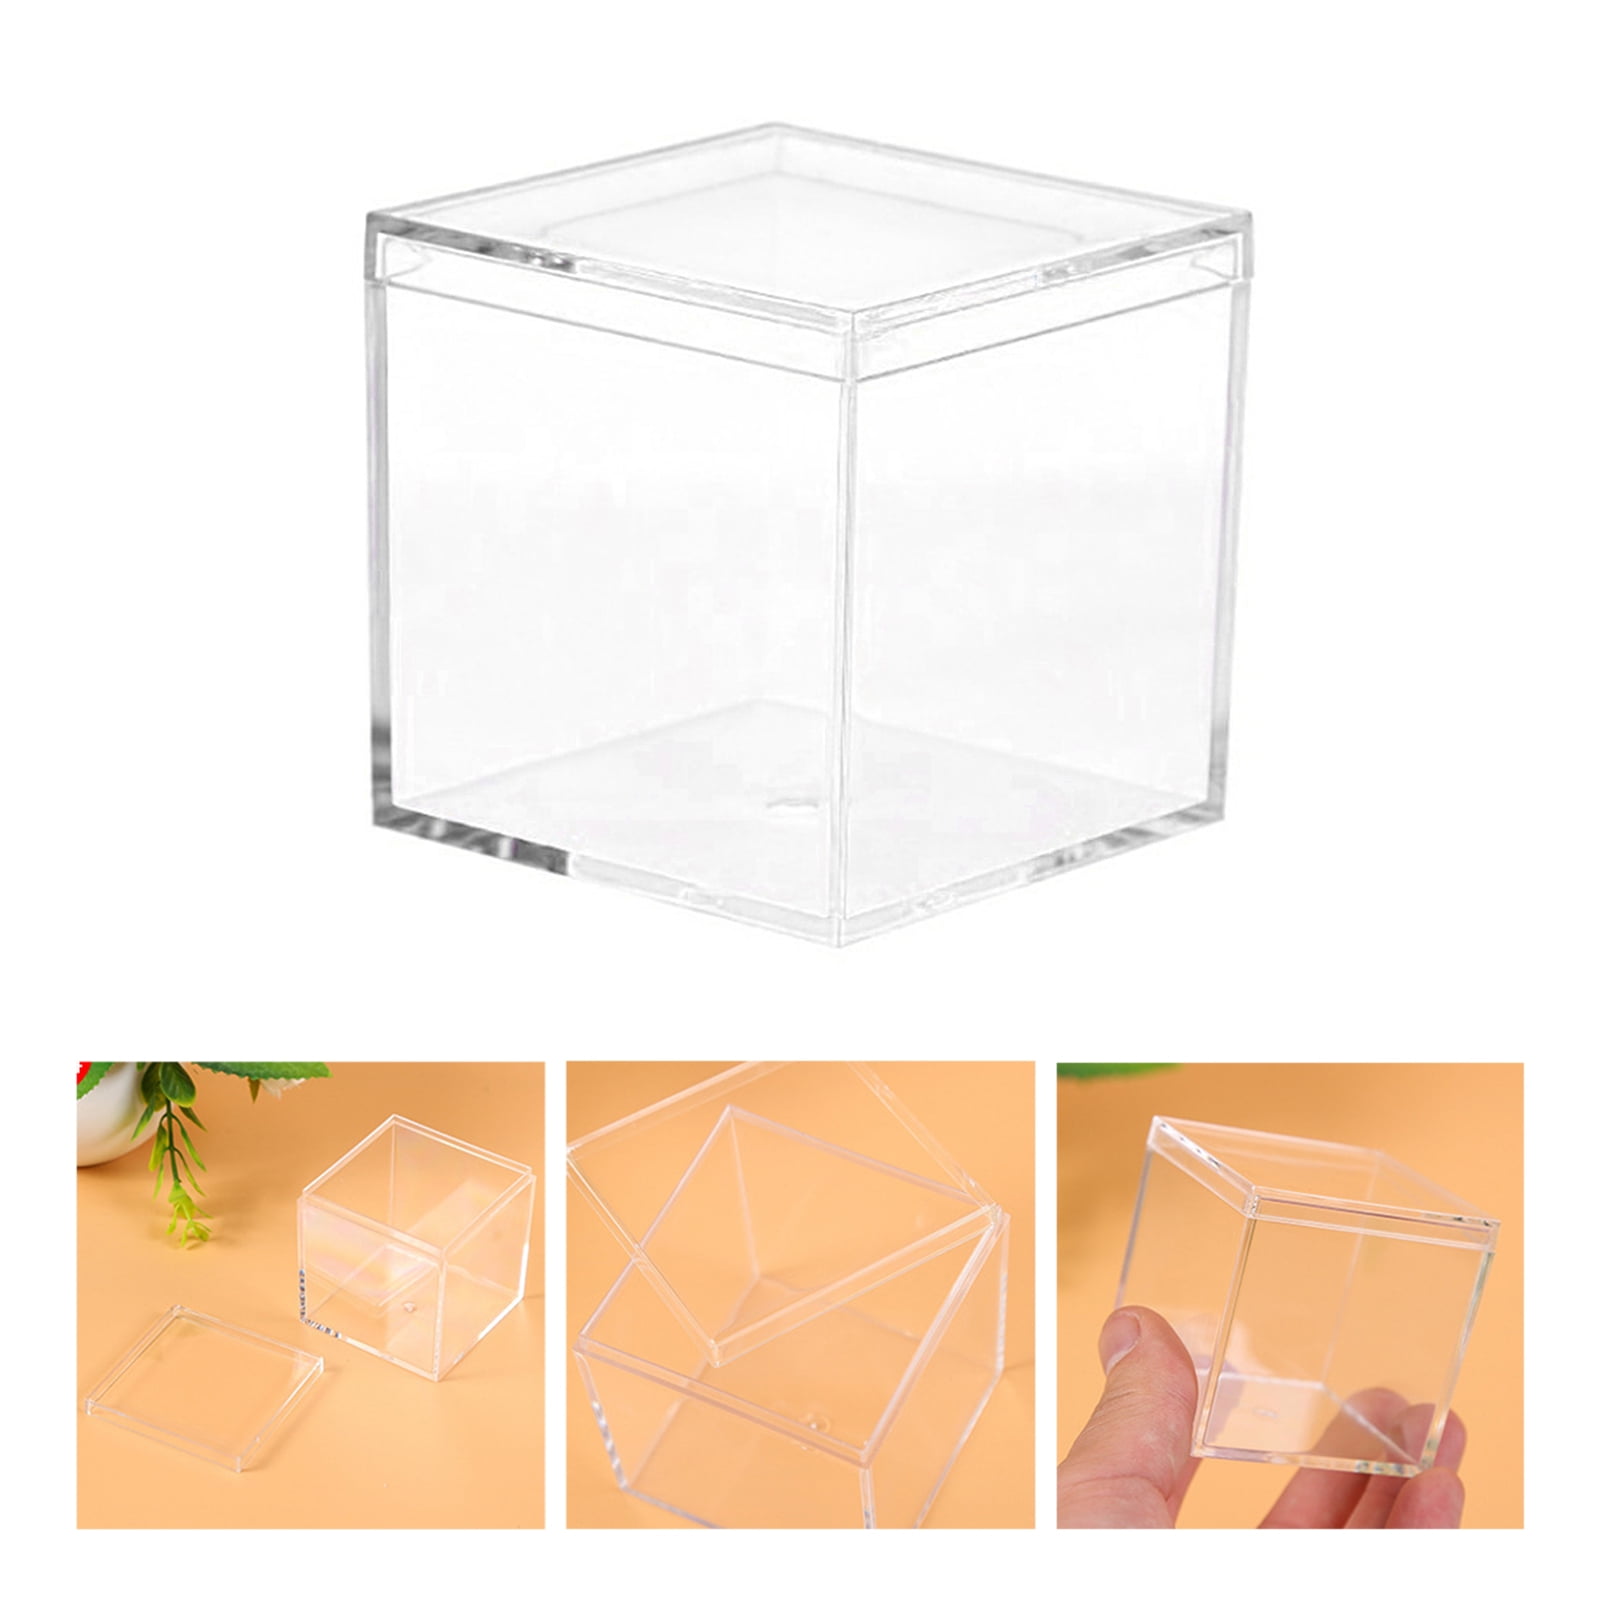 Cuteam Acrylic Display Box,Four-Layers Sliding Door Acrylic Display Box Show Case for Mini Perfume Bottle, Size: One size, Other